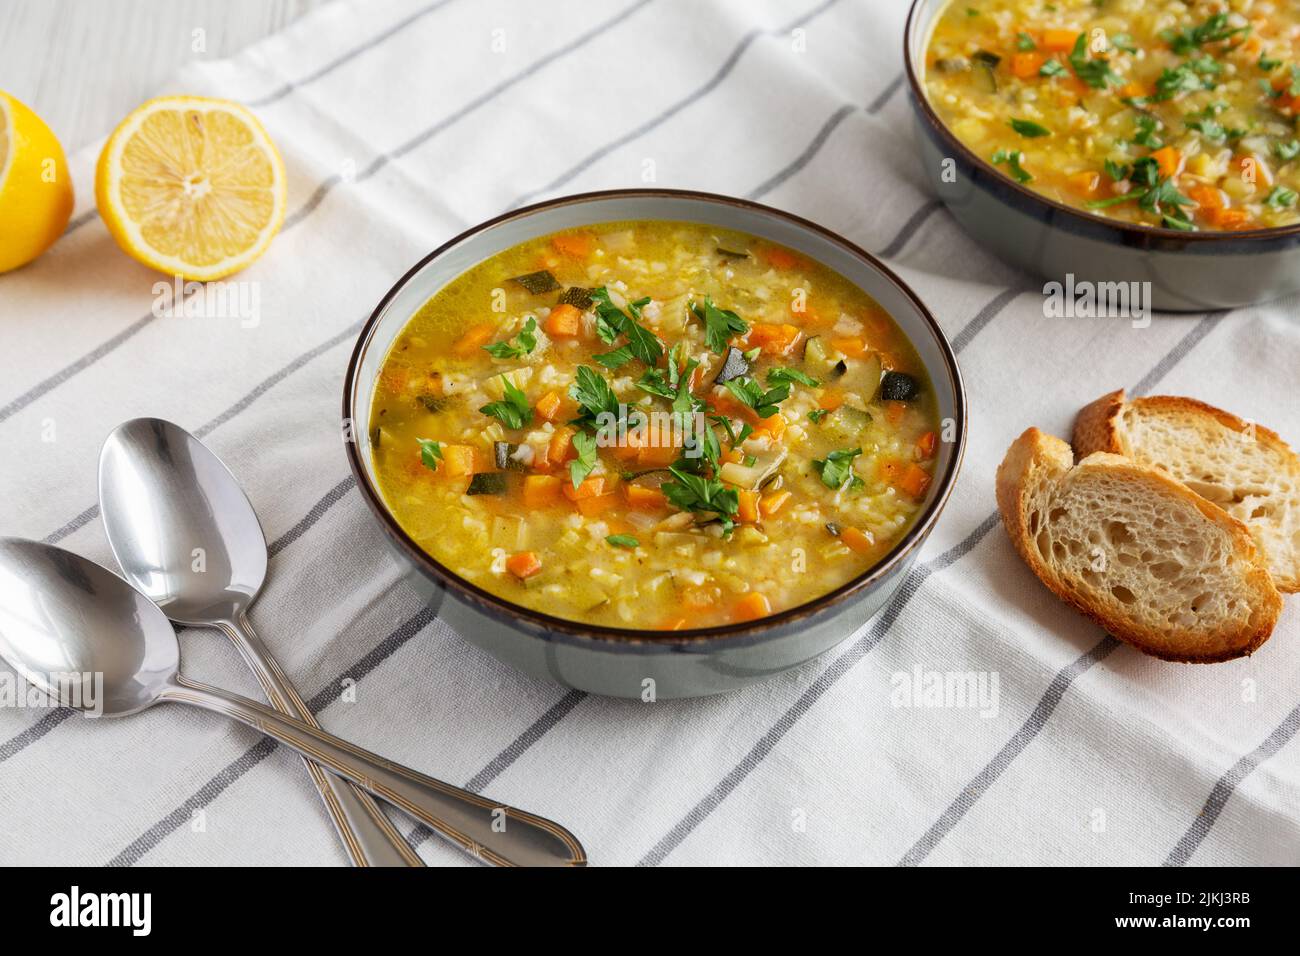 Homemade fresh lemon rice soup in a bowl, side view. Stock Photo